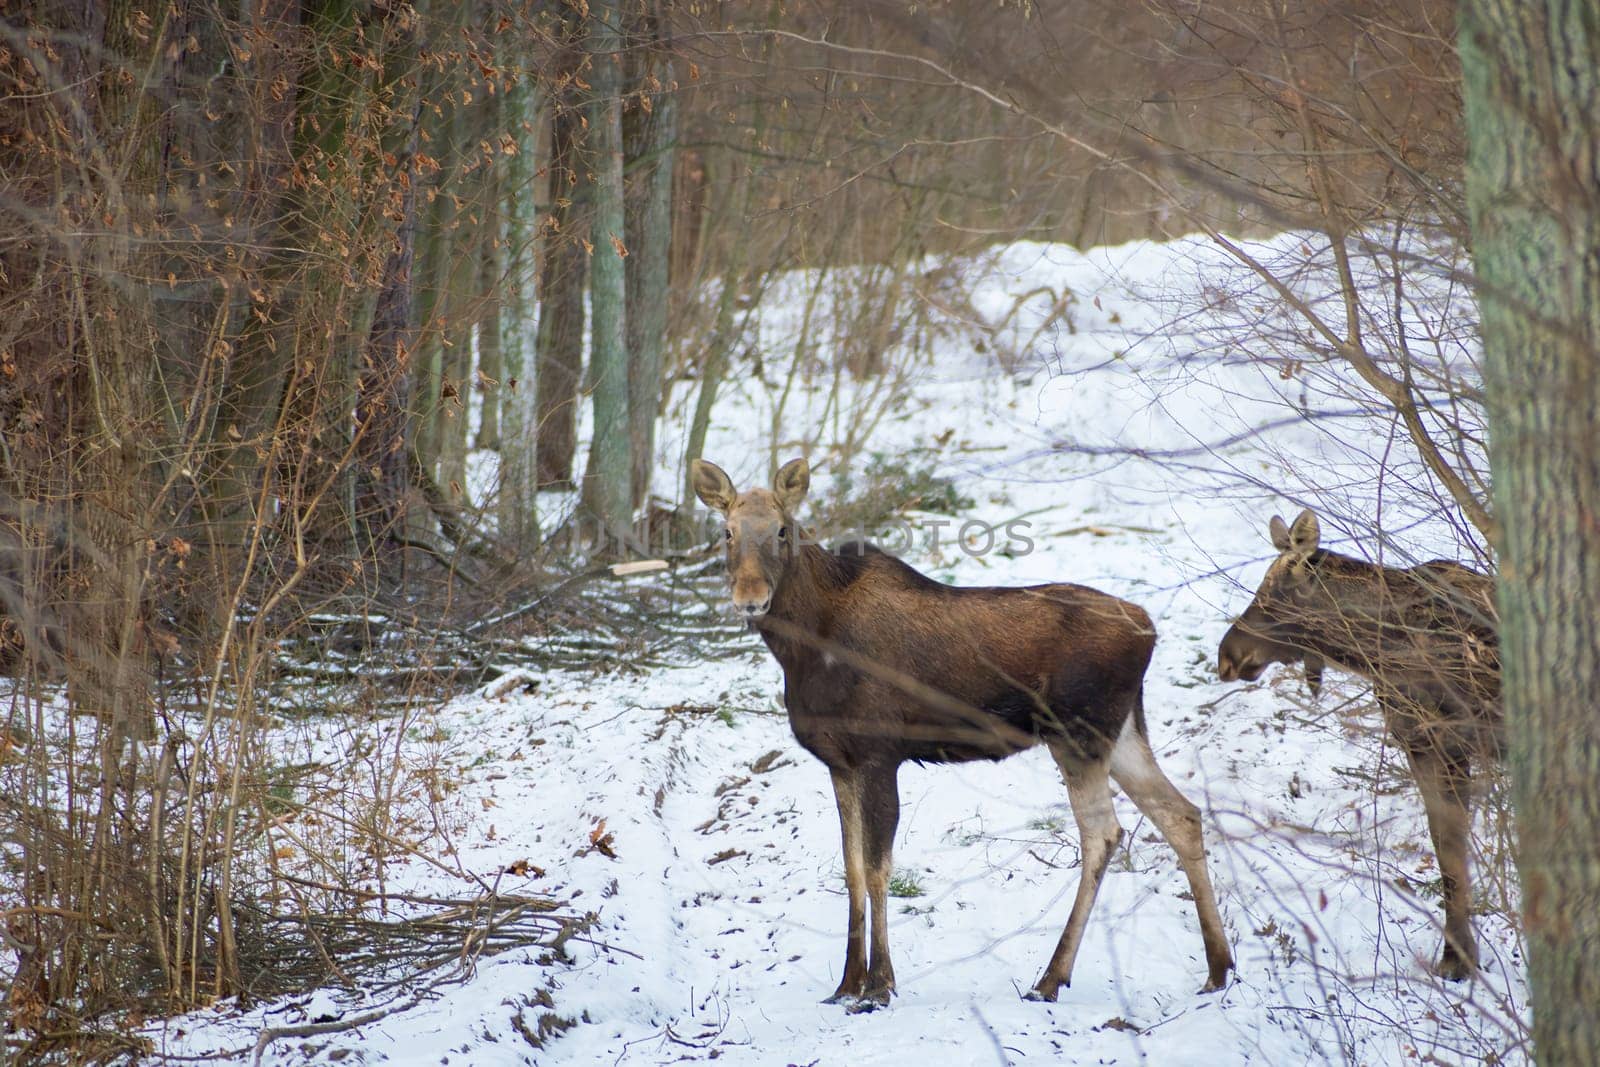 Mooses in the winter forest, January day by darekb22